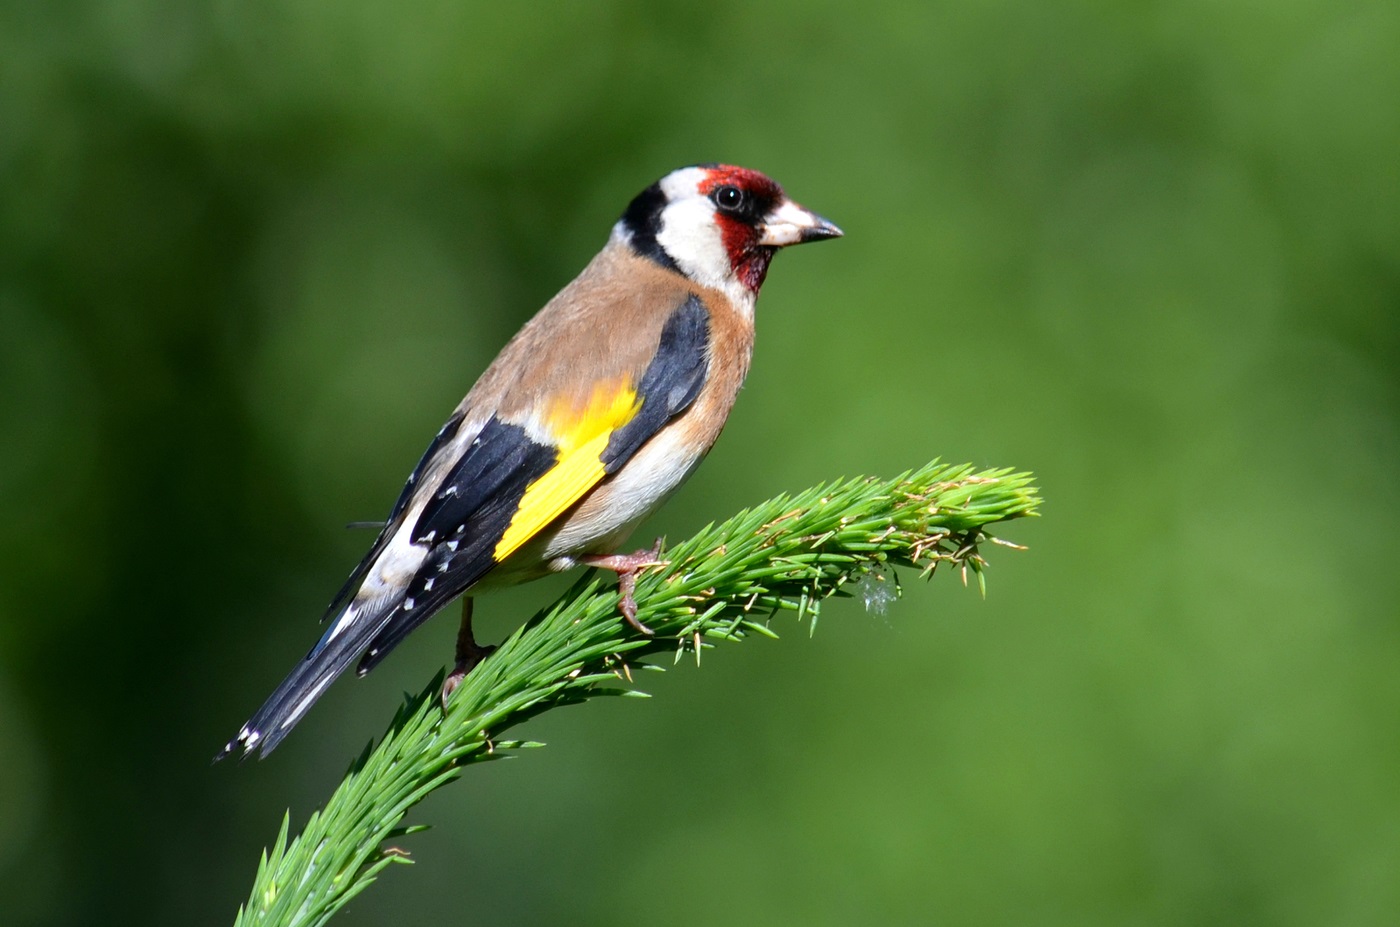 Goldfinch on a branch of spruce